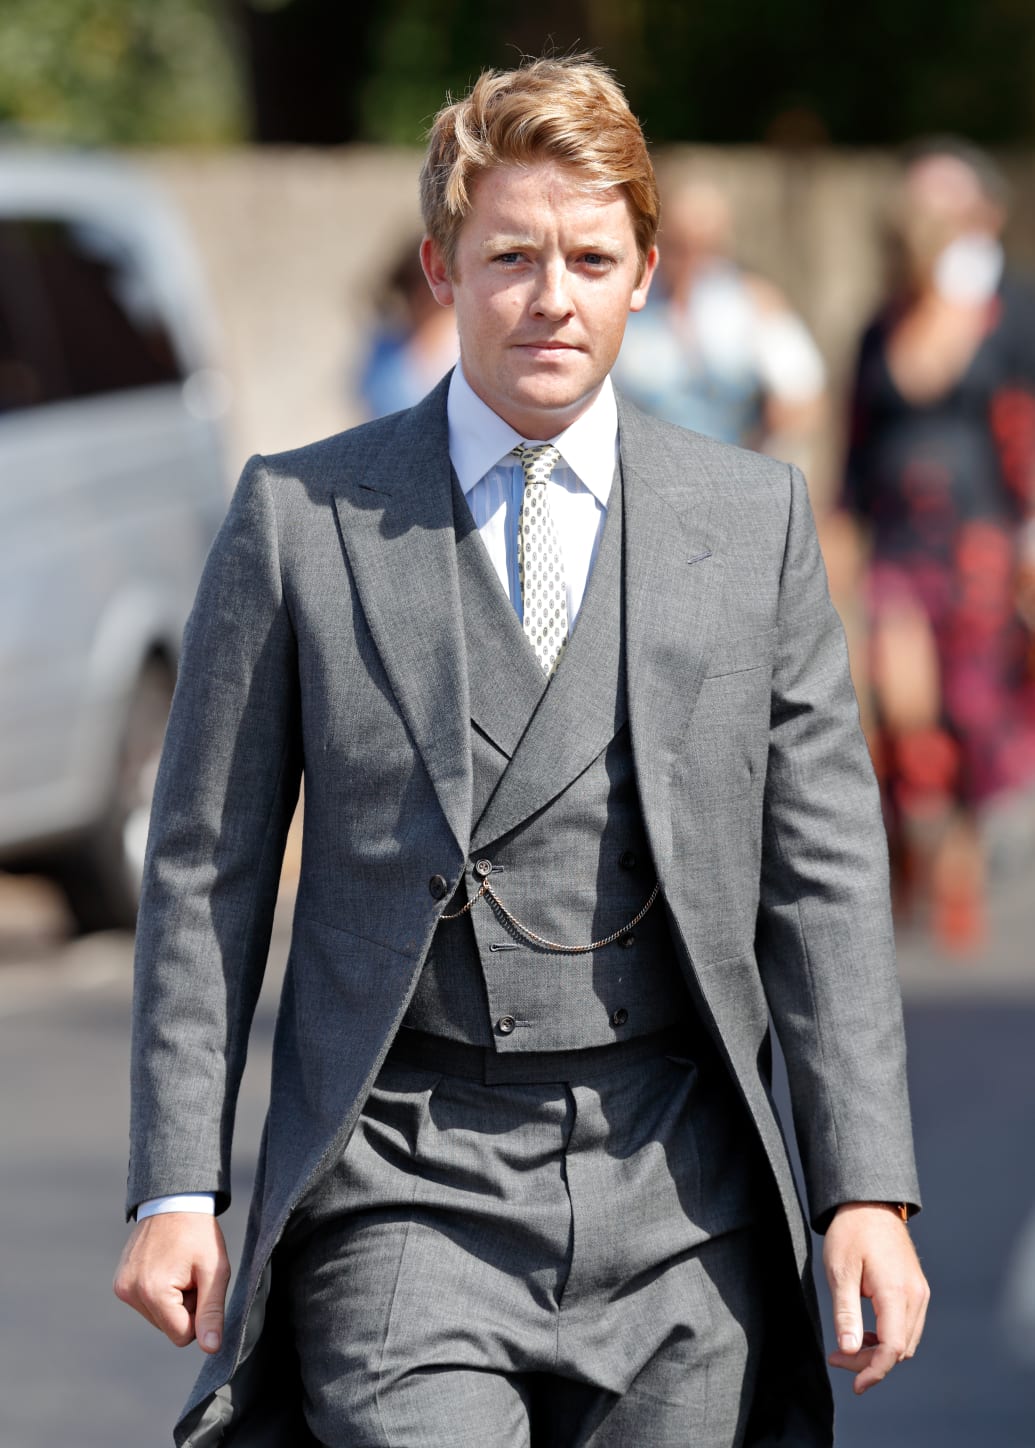 Hugh Grosvenor, Duke of Westminster attends the wedding of Charlie van Straubenzee and Daisy Jenks at the church of St Mary the Virgin on August 4, 2018 in Frensham, England.